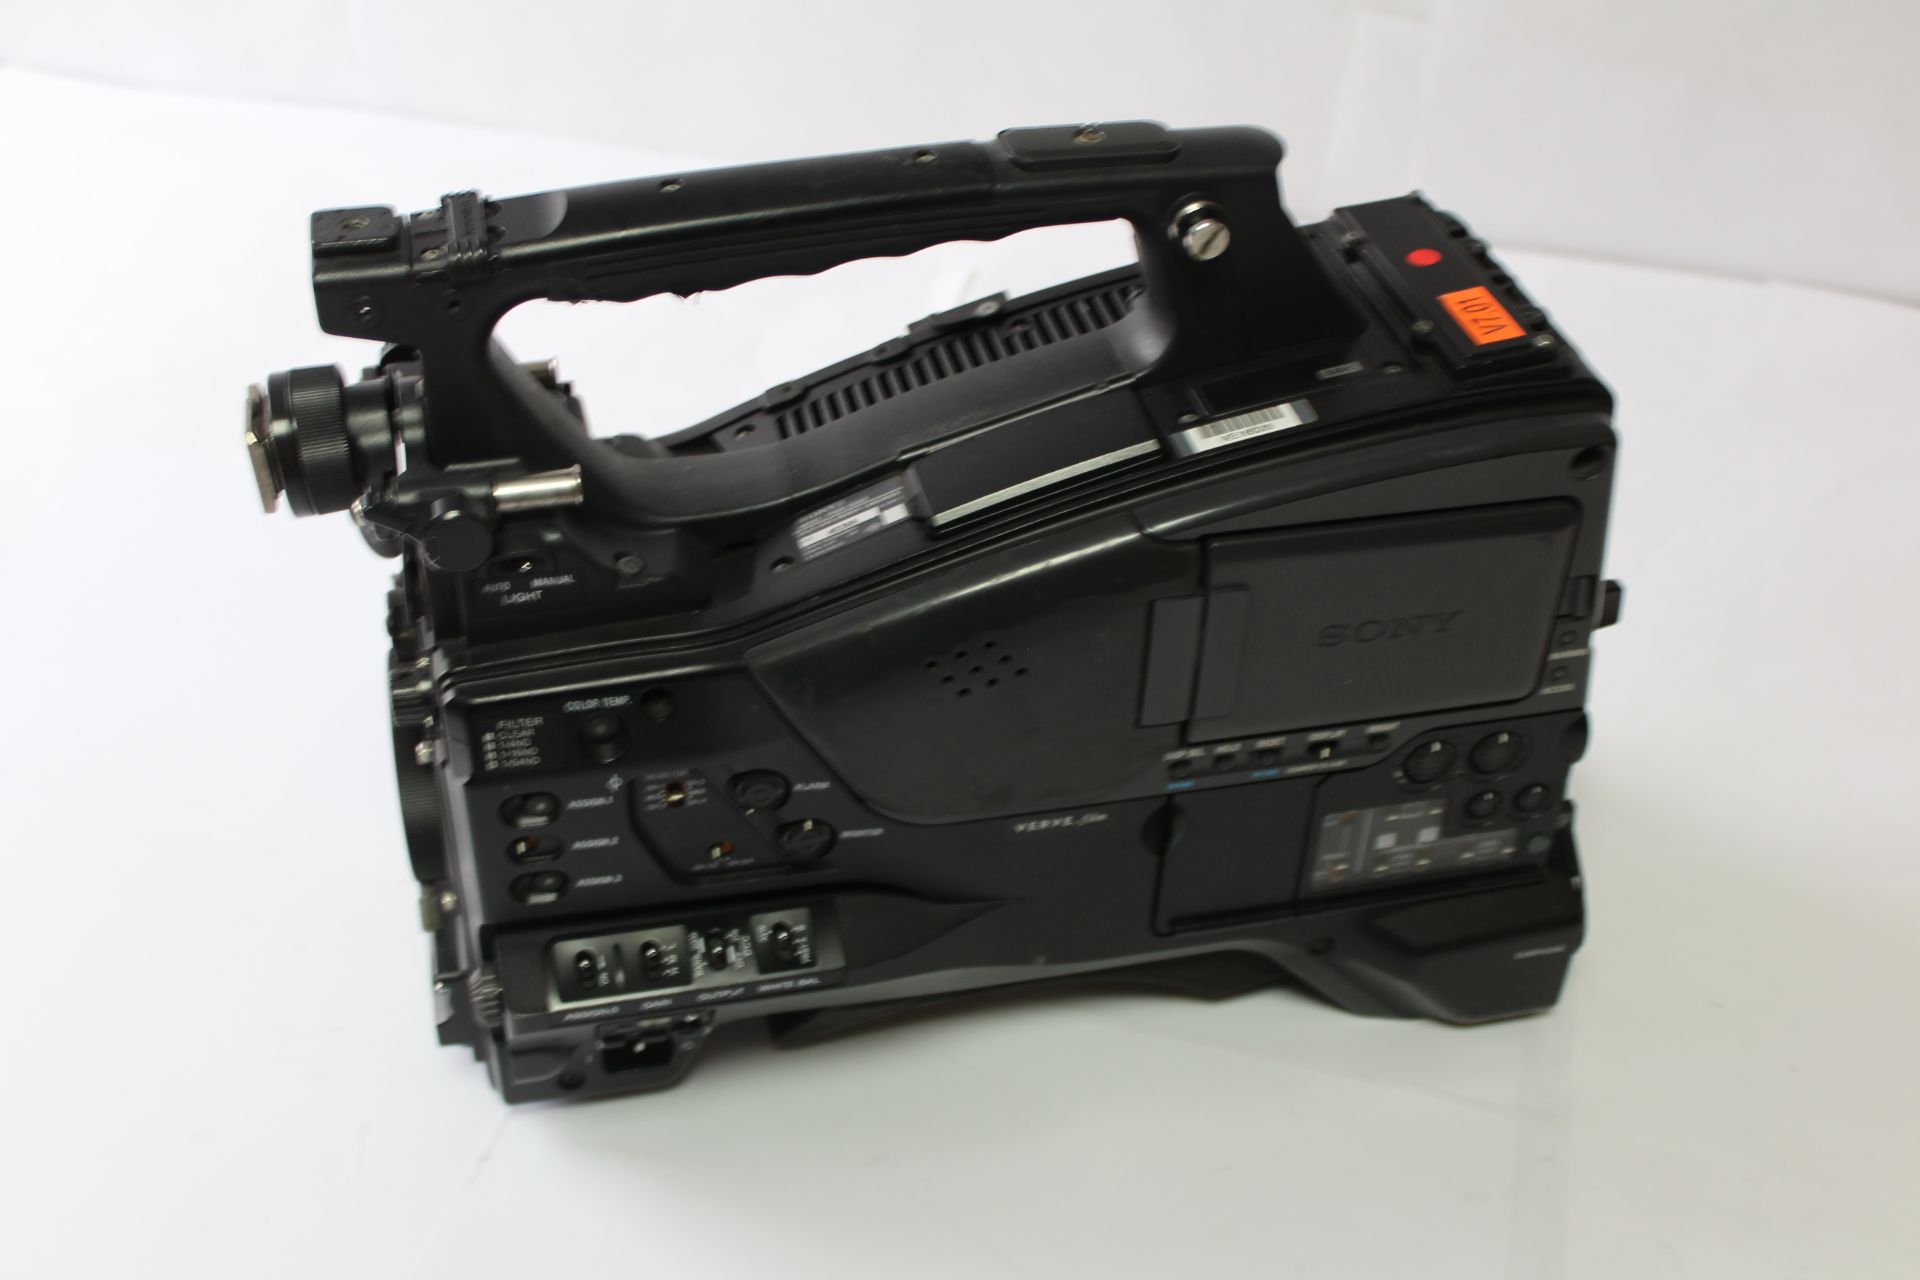 Sony PXW-X500 Solid State Memory Camcorder - Image 2 of 2